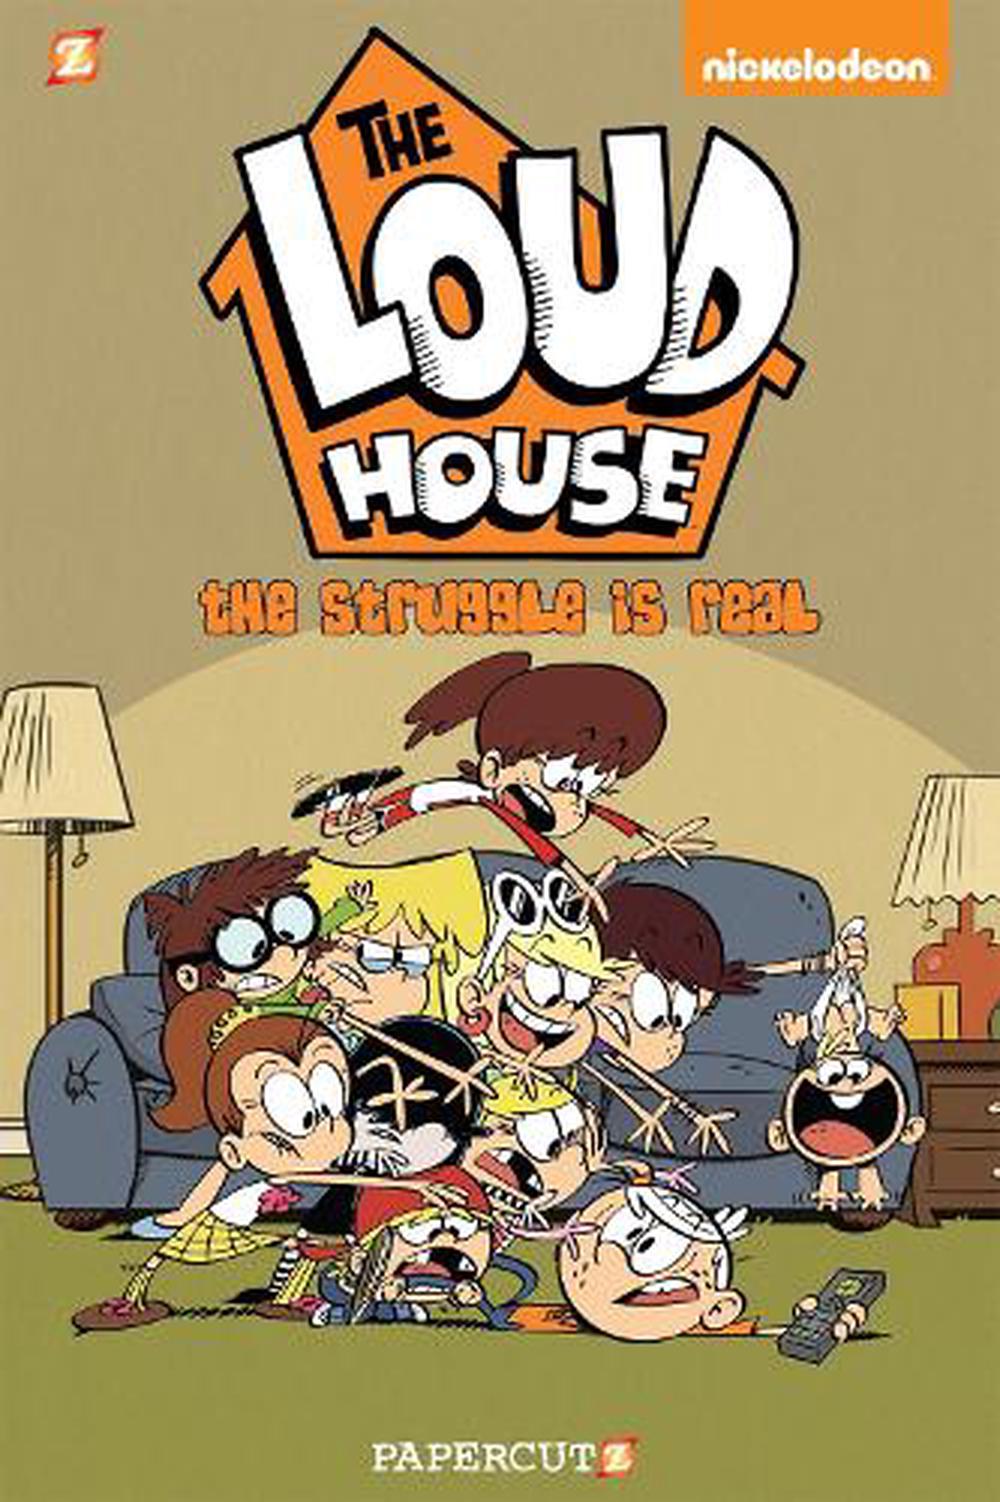 Loud House 7 The Struggle Is Real By The Loud House Creative Team 